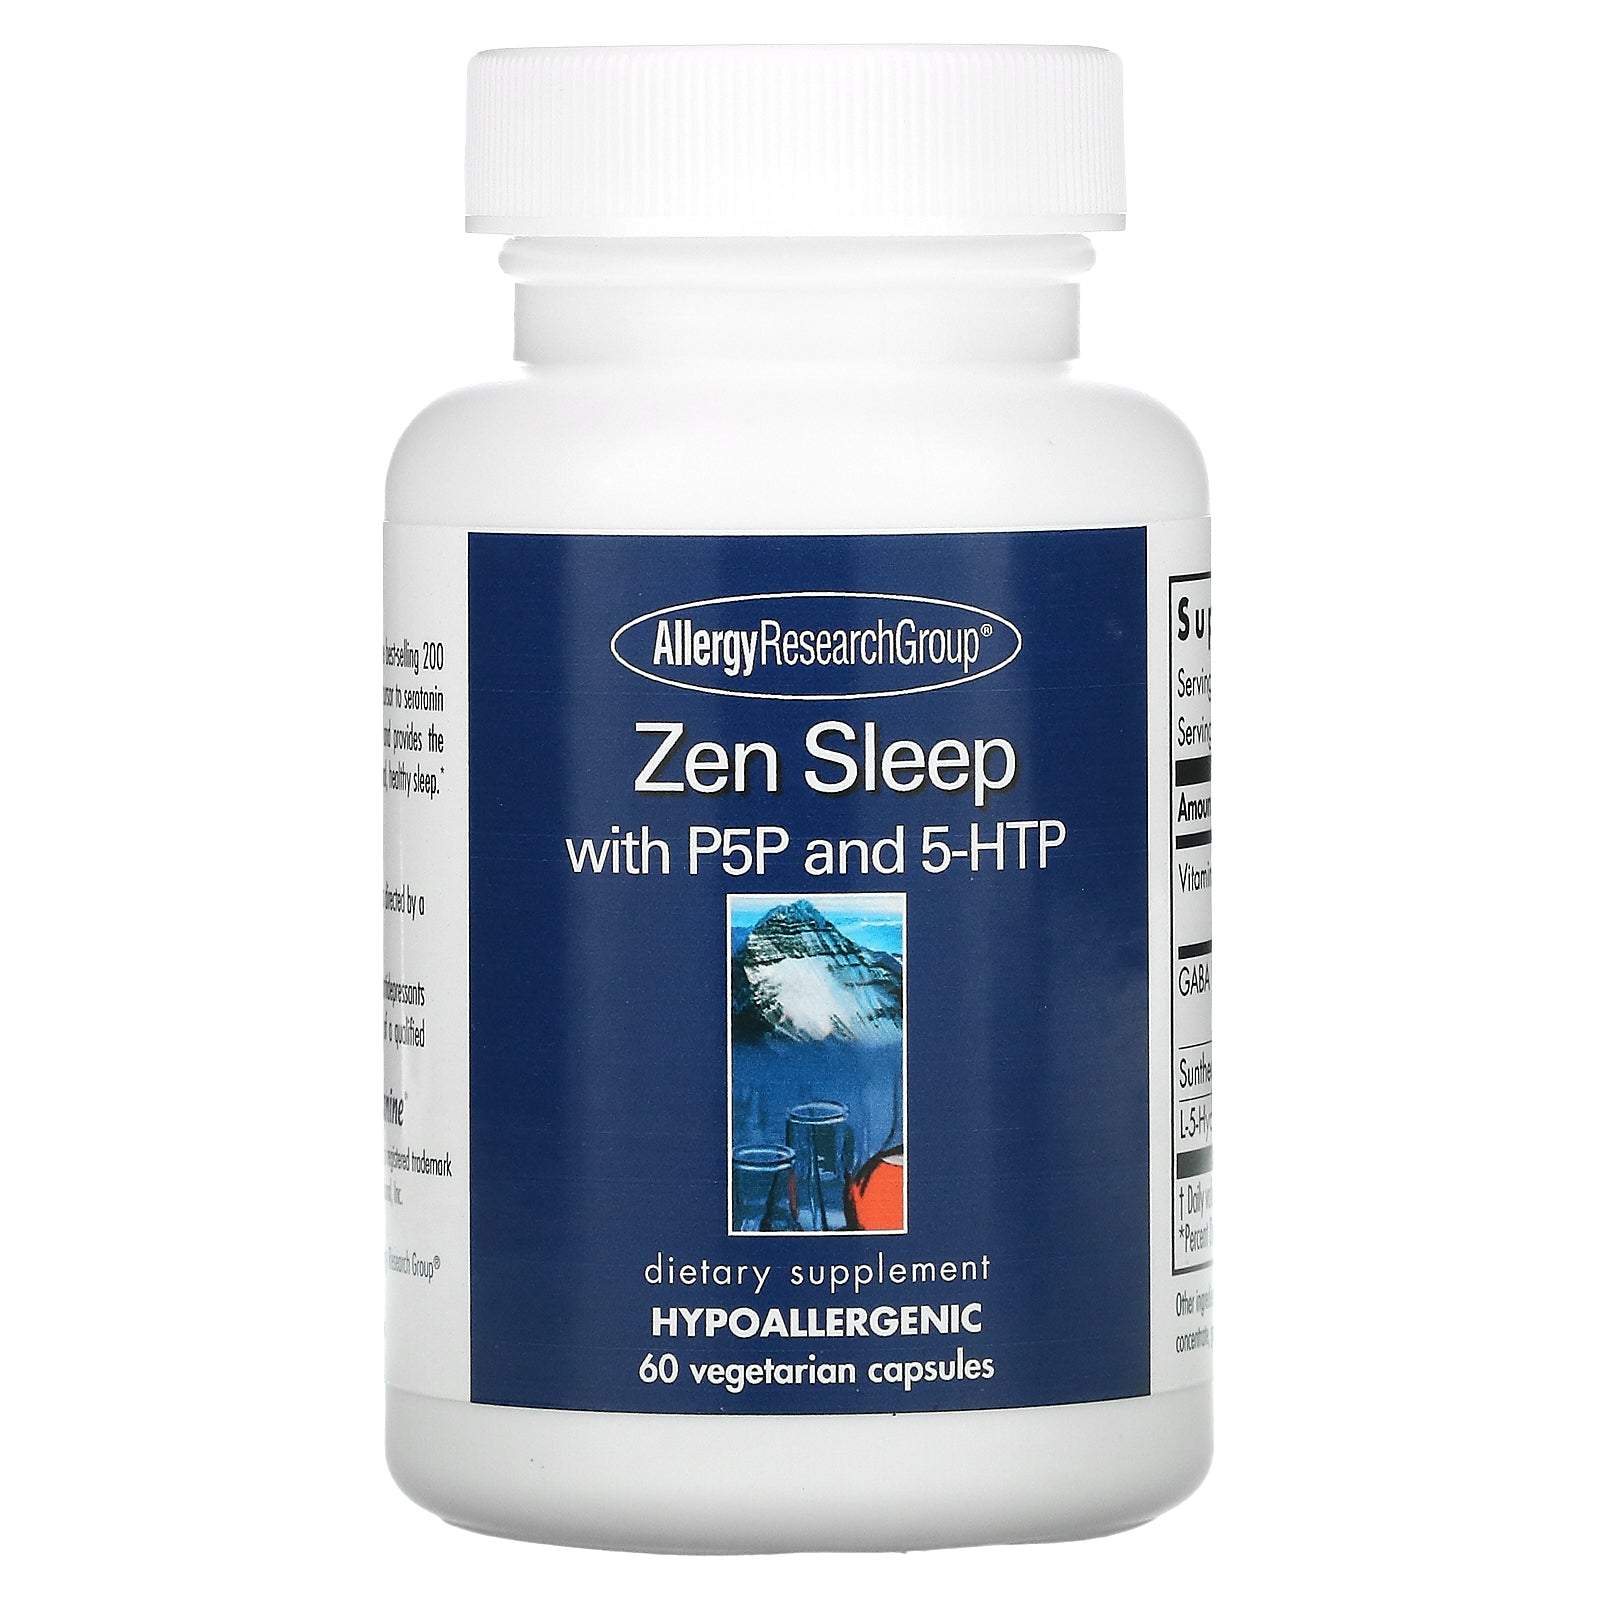 Allergy Research Group, Zen Sleep with P5P and 5-HTP